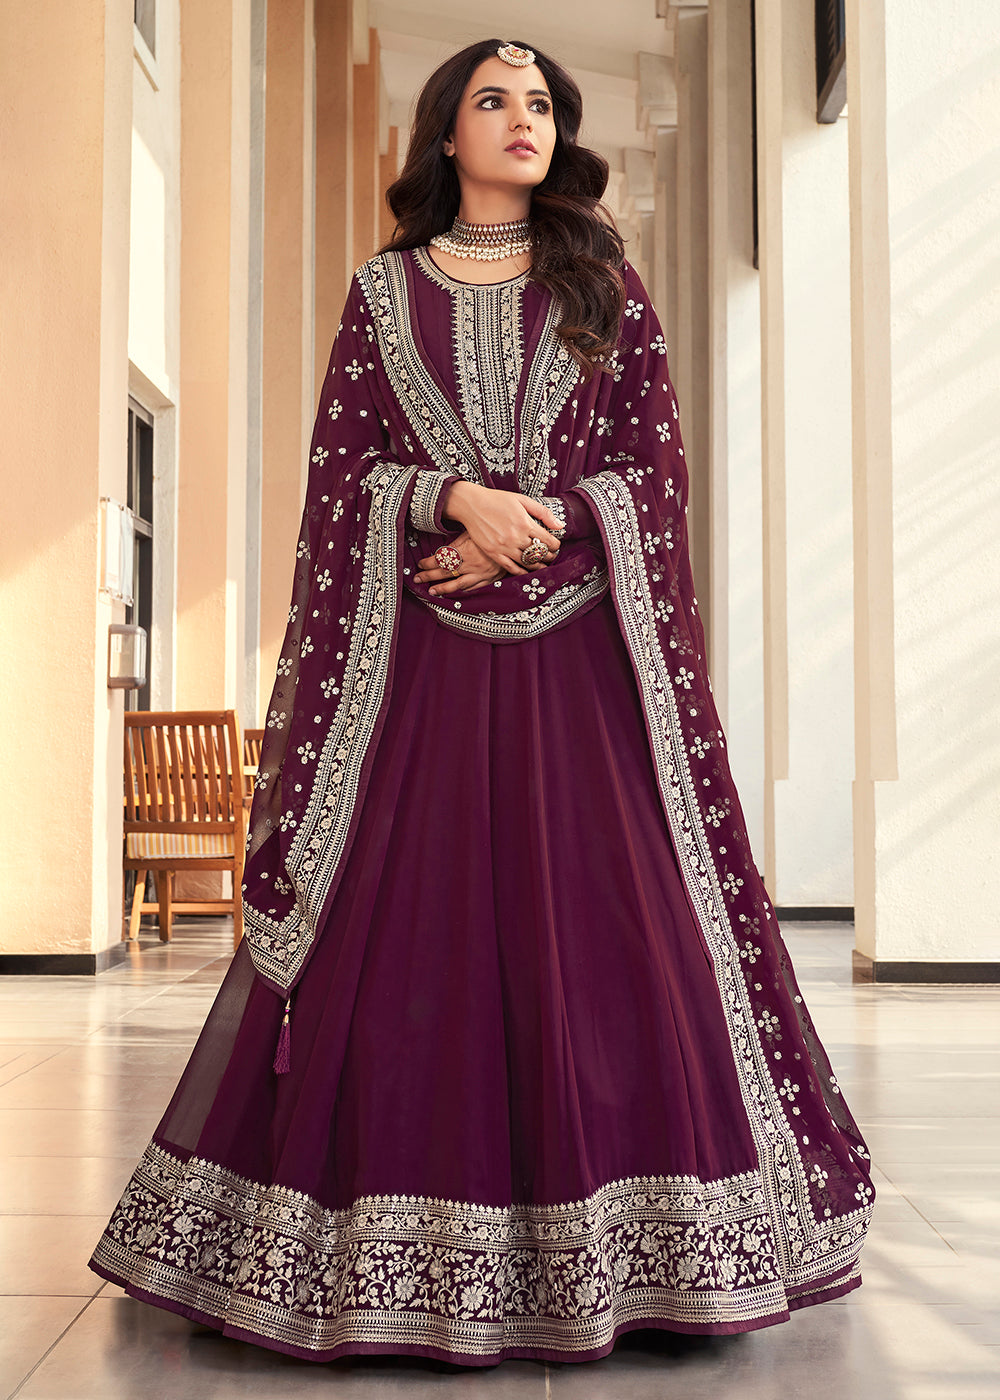 Buy Now Georgette Wine Purple Embroidered Indian Long Anarkali Dress Online in USA, UK, Australia, New Zealand, Canada & Worldwide at Empress Clothing. 